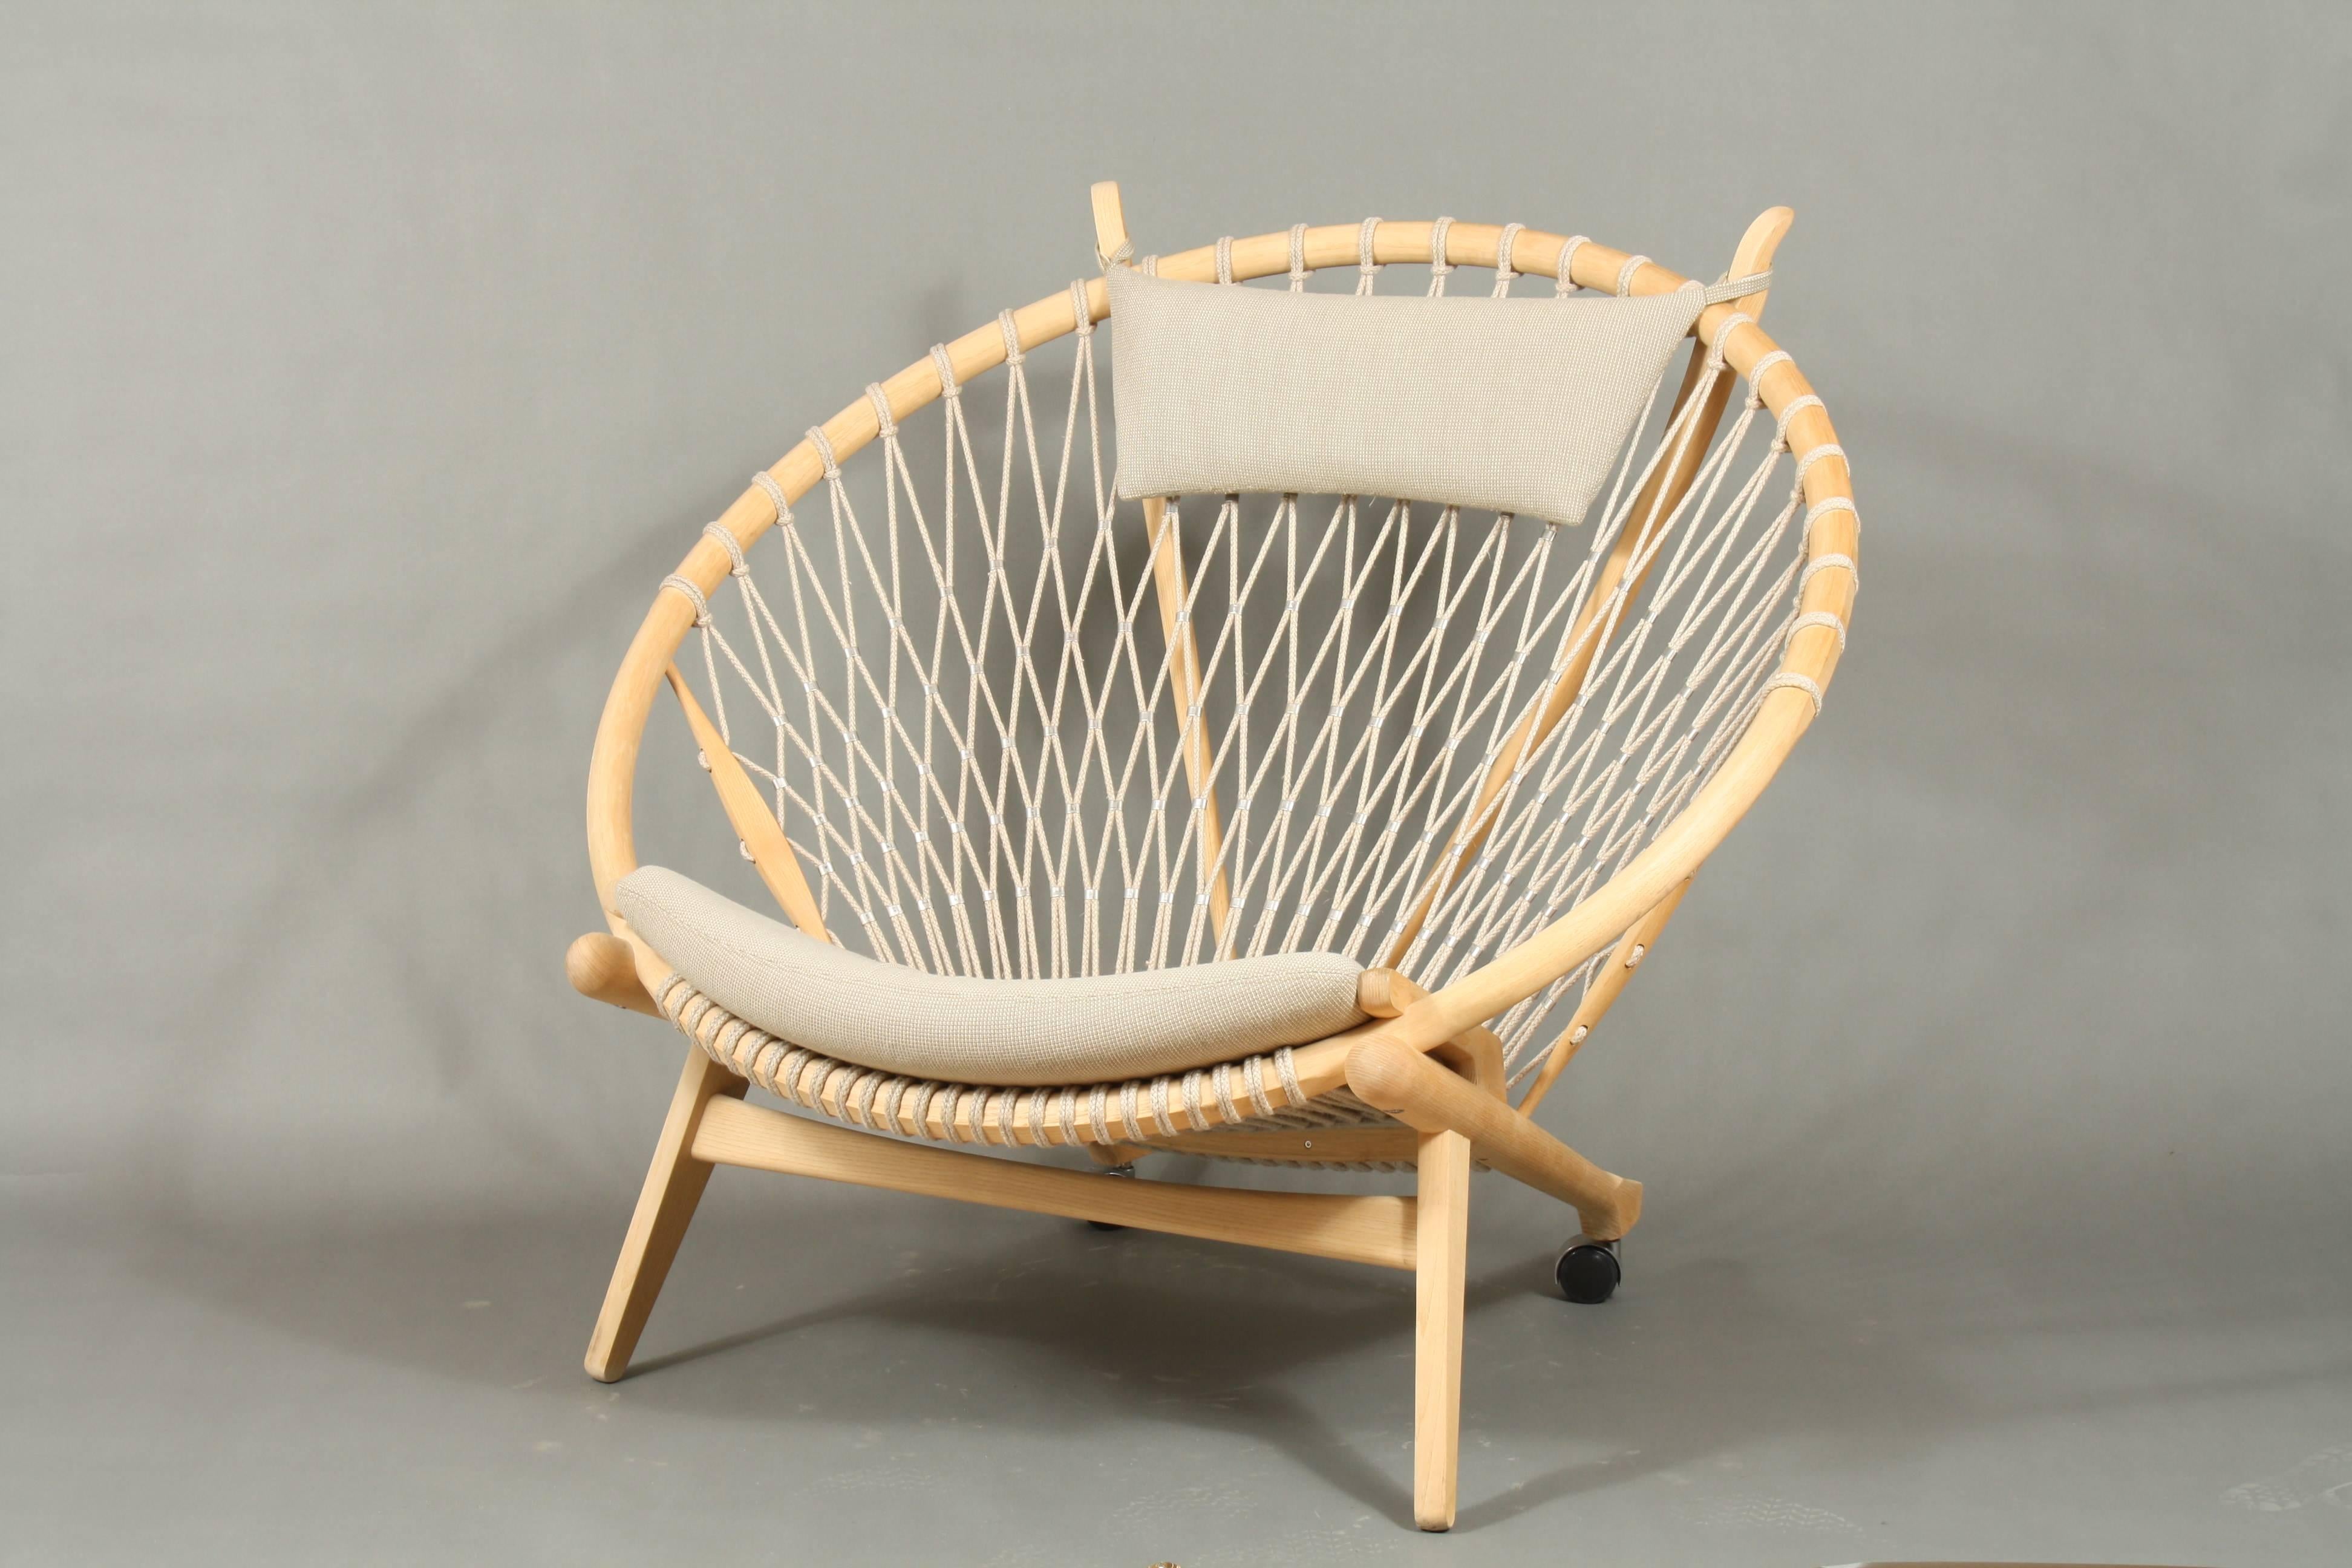 Very nice piece of design by Hans J. Wegner. Circle ' PP130 chair designed by for PP Möbler.
The frame is made of soaped oak. The net that constitutes the seat and the back is made of one piece of rope secured with stainless steel clips.
The hind